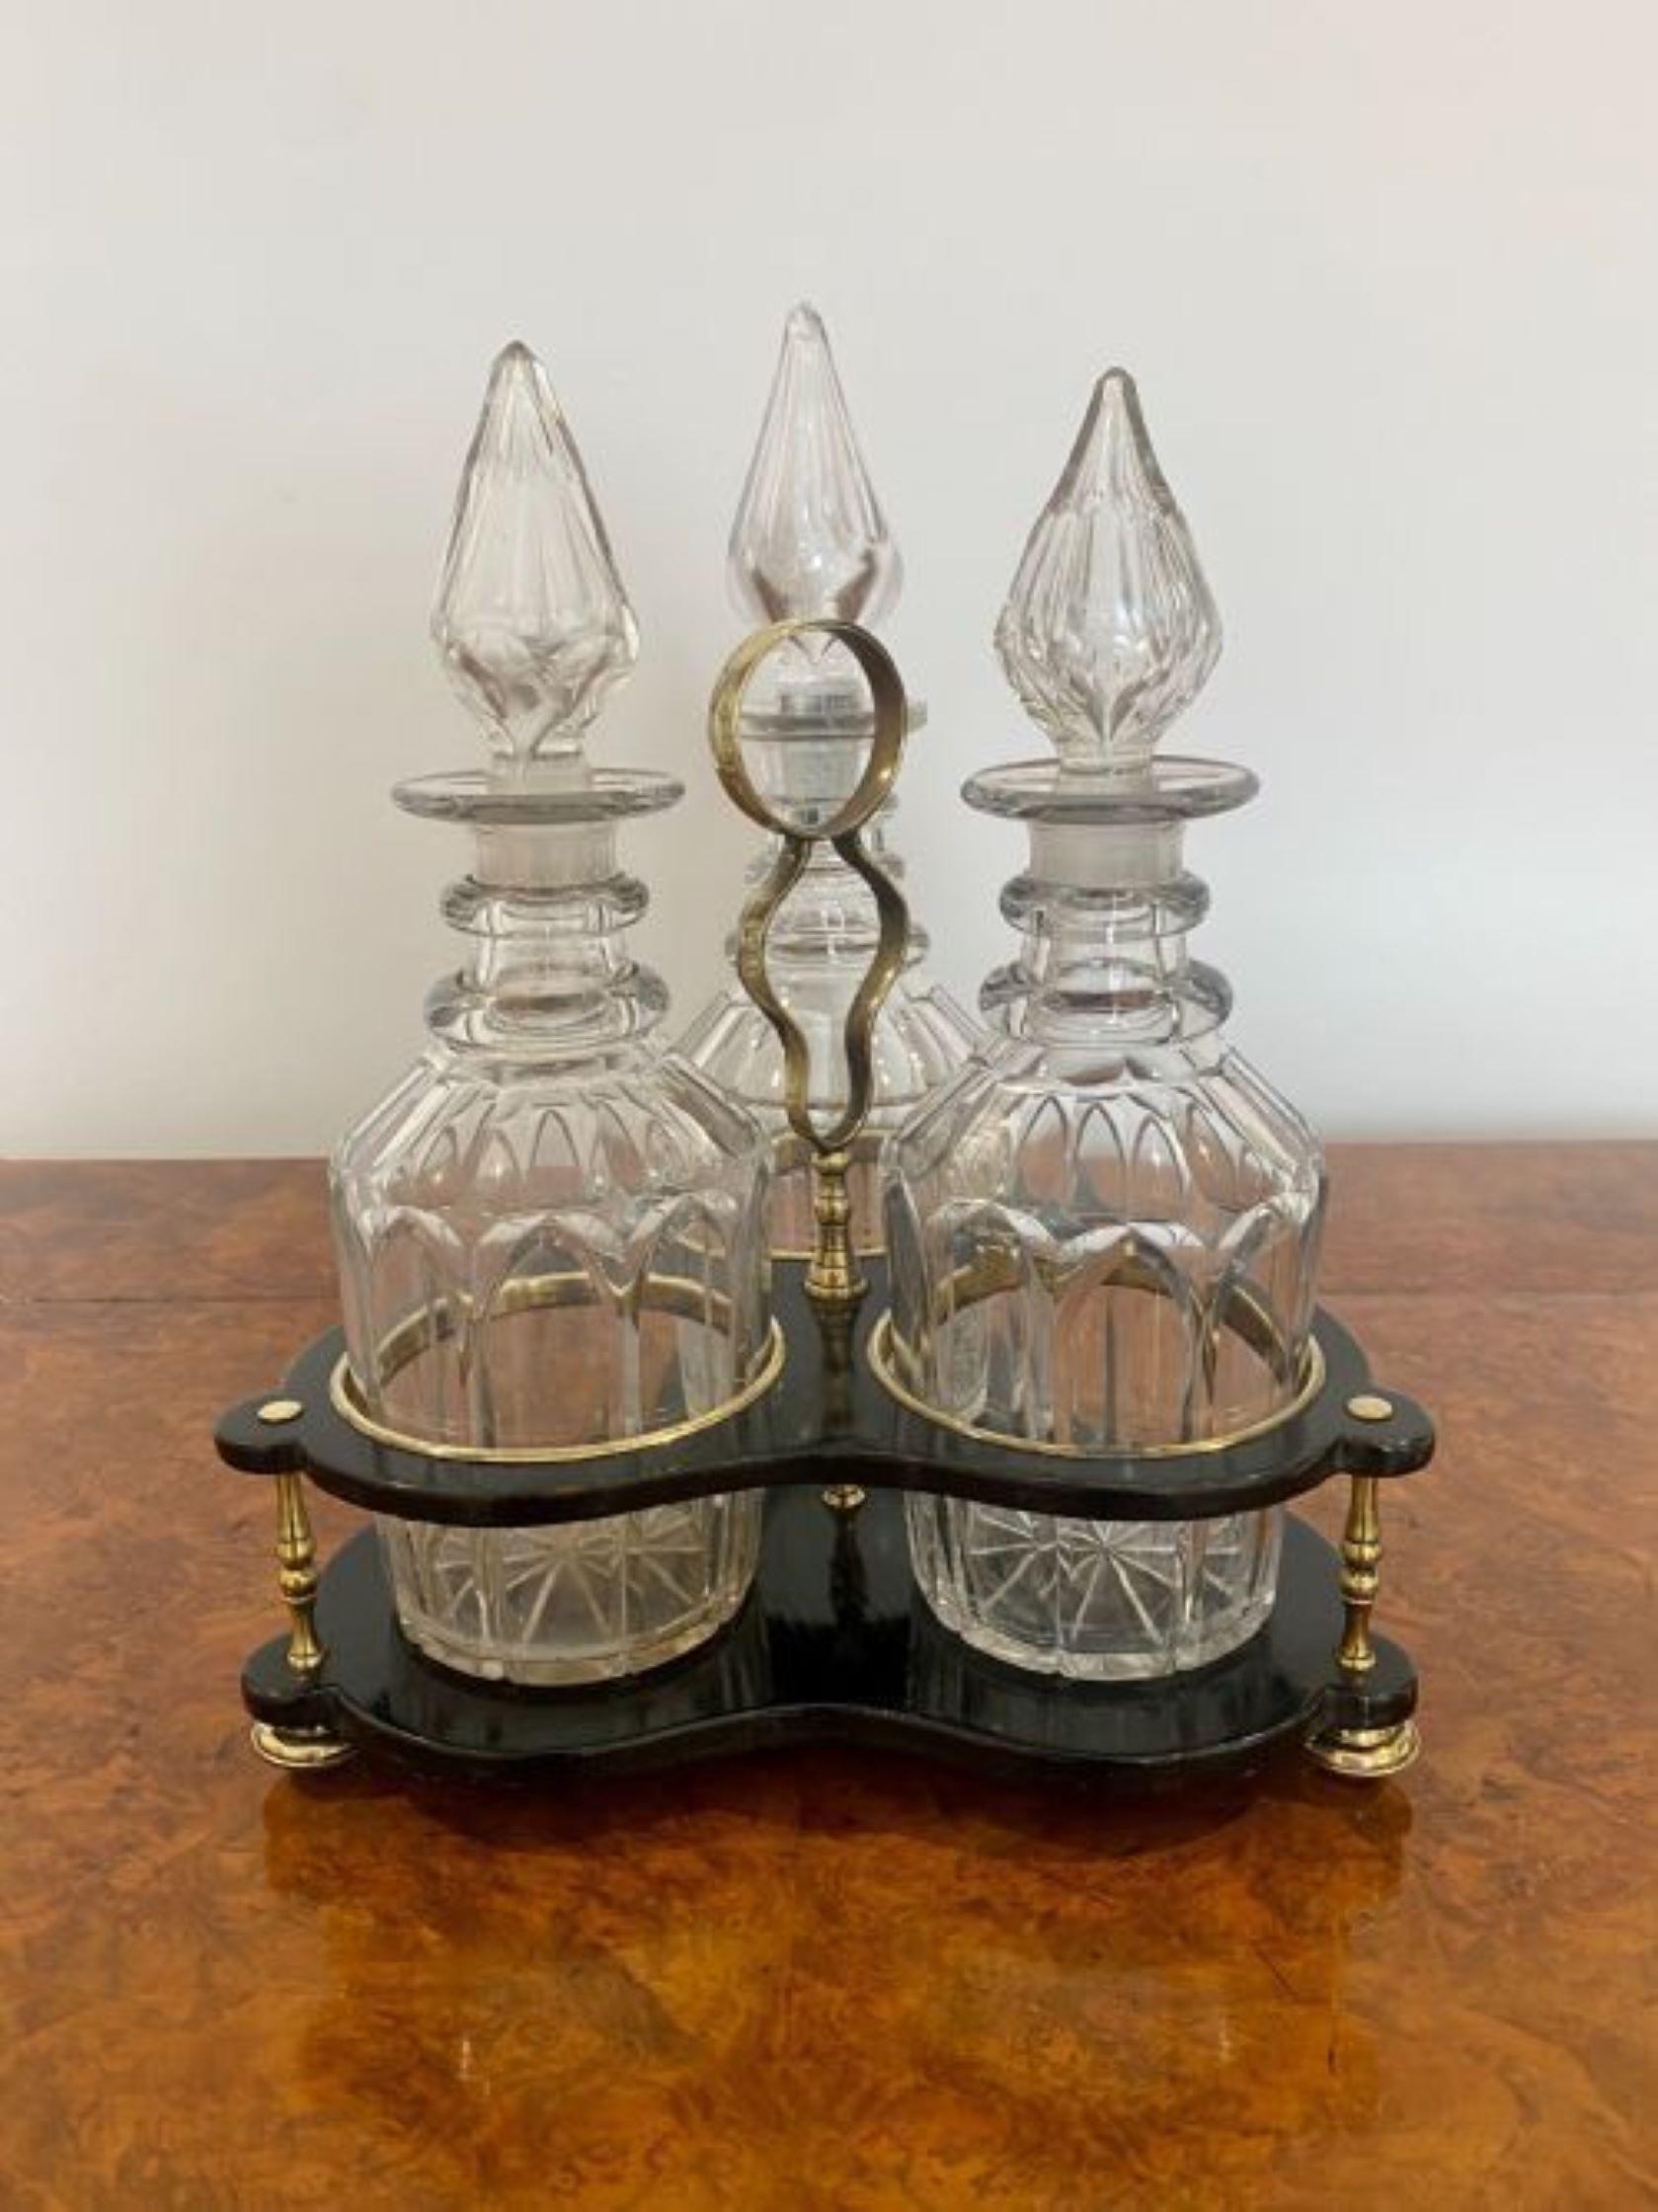 Glass Antique Victorian quality decanter stand with three original cut glass decanters For Sale